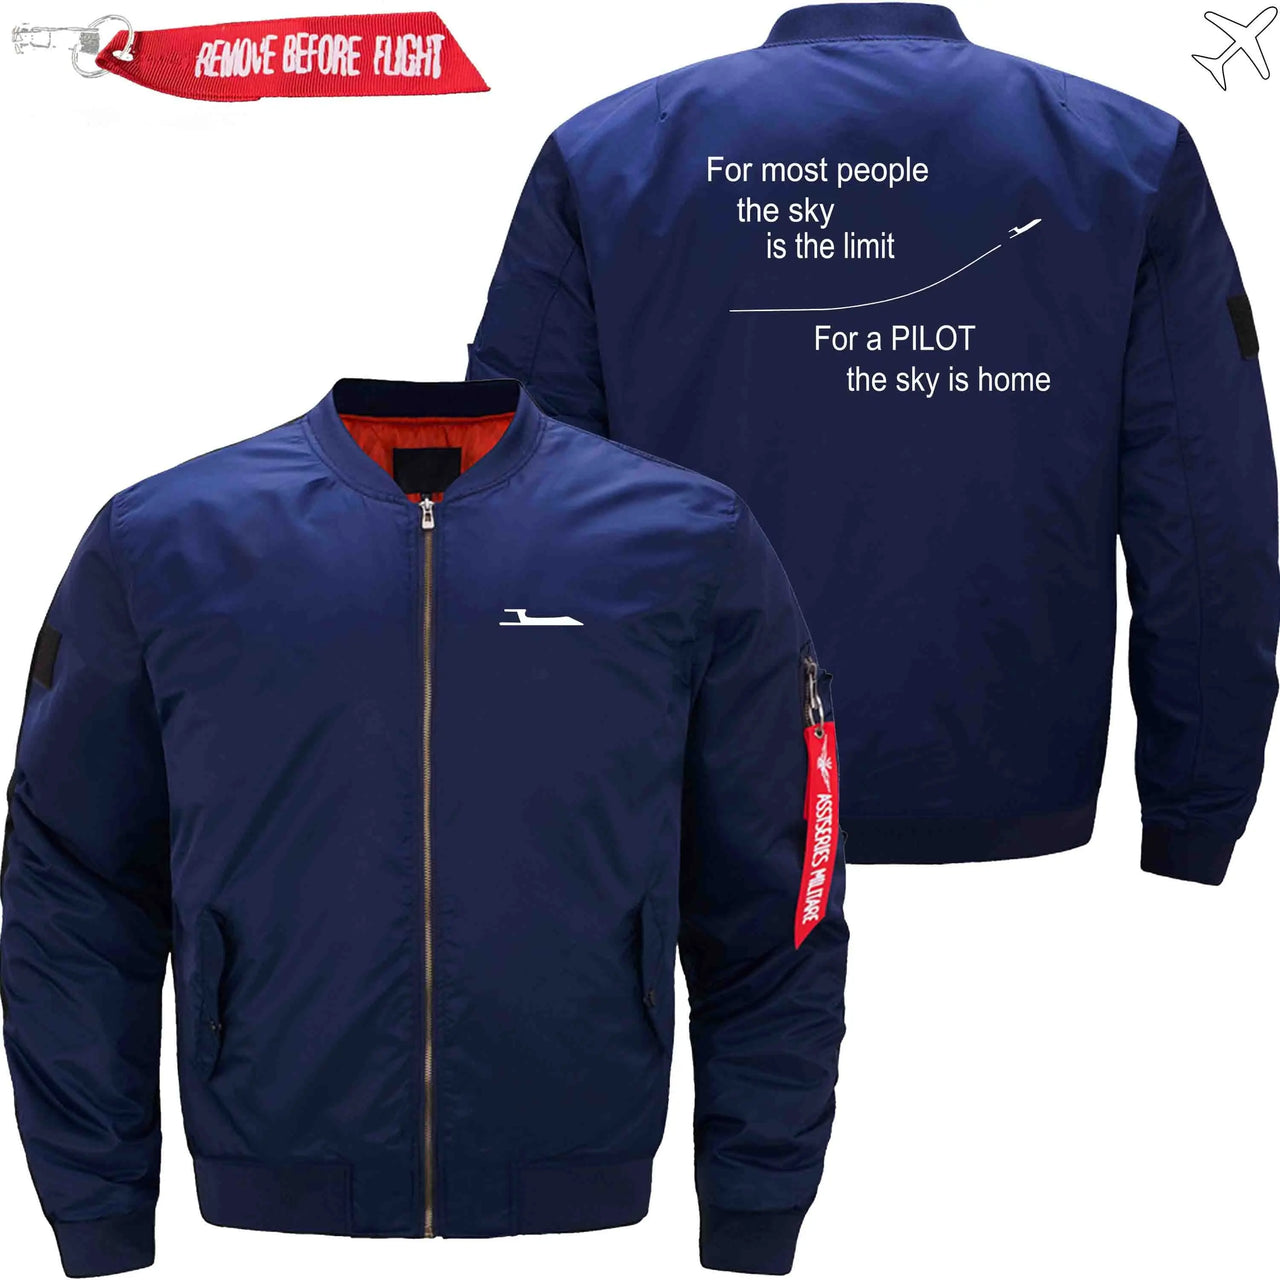 FOR MOST PEOPLE THE SKY IS THE LIMIT - JACKET THE AV8R